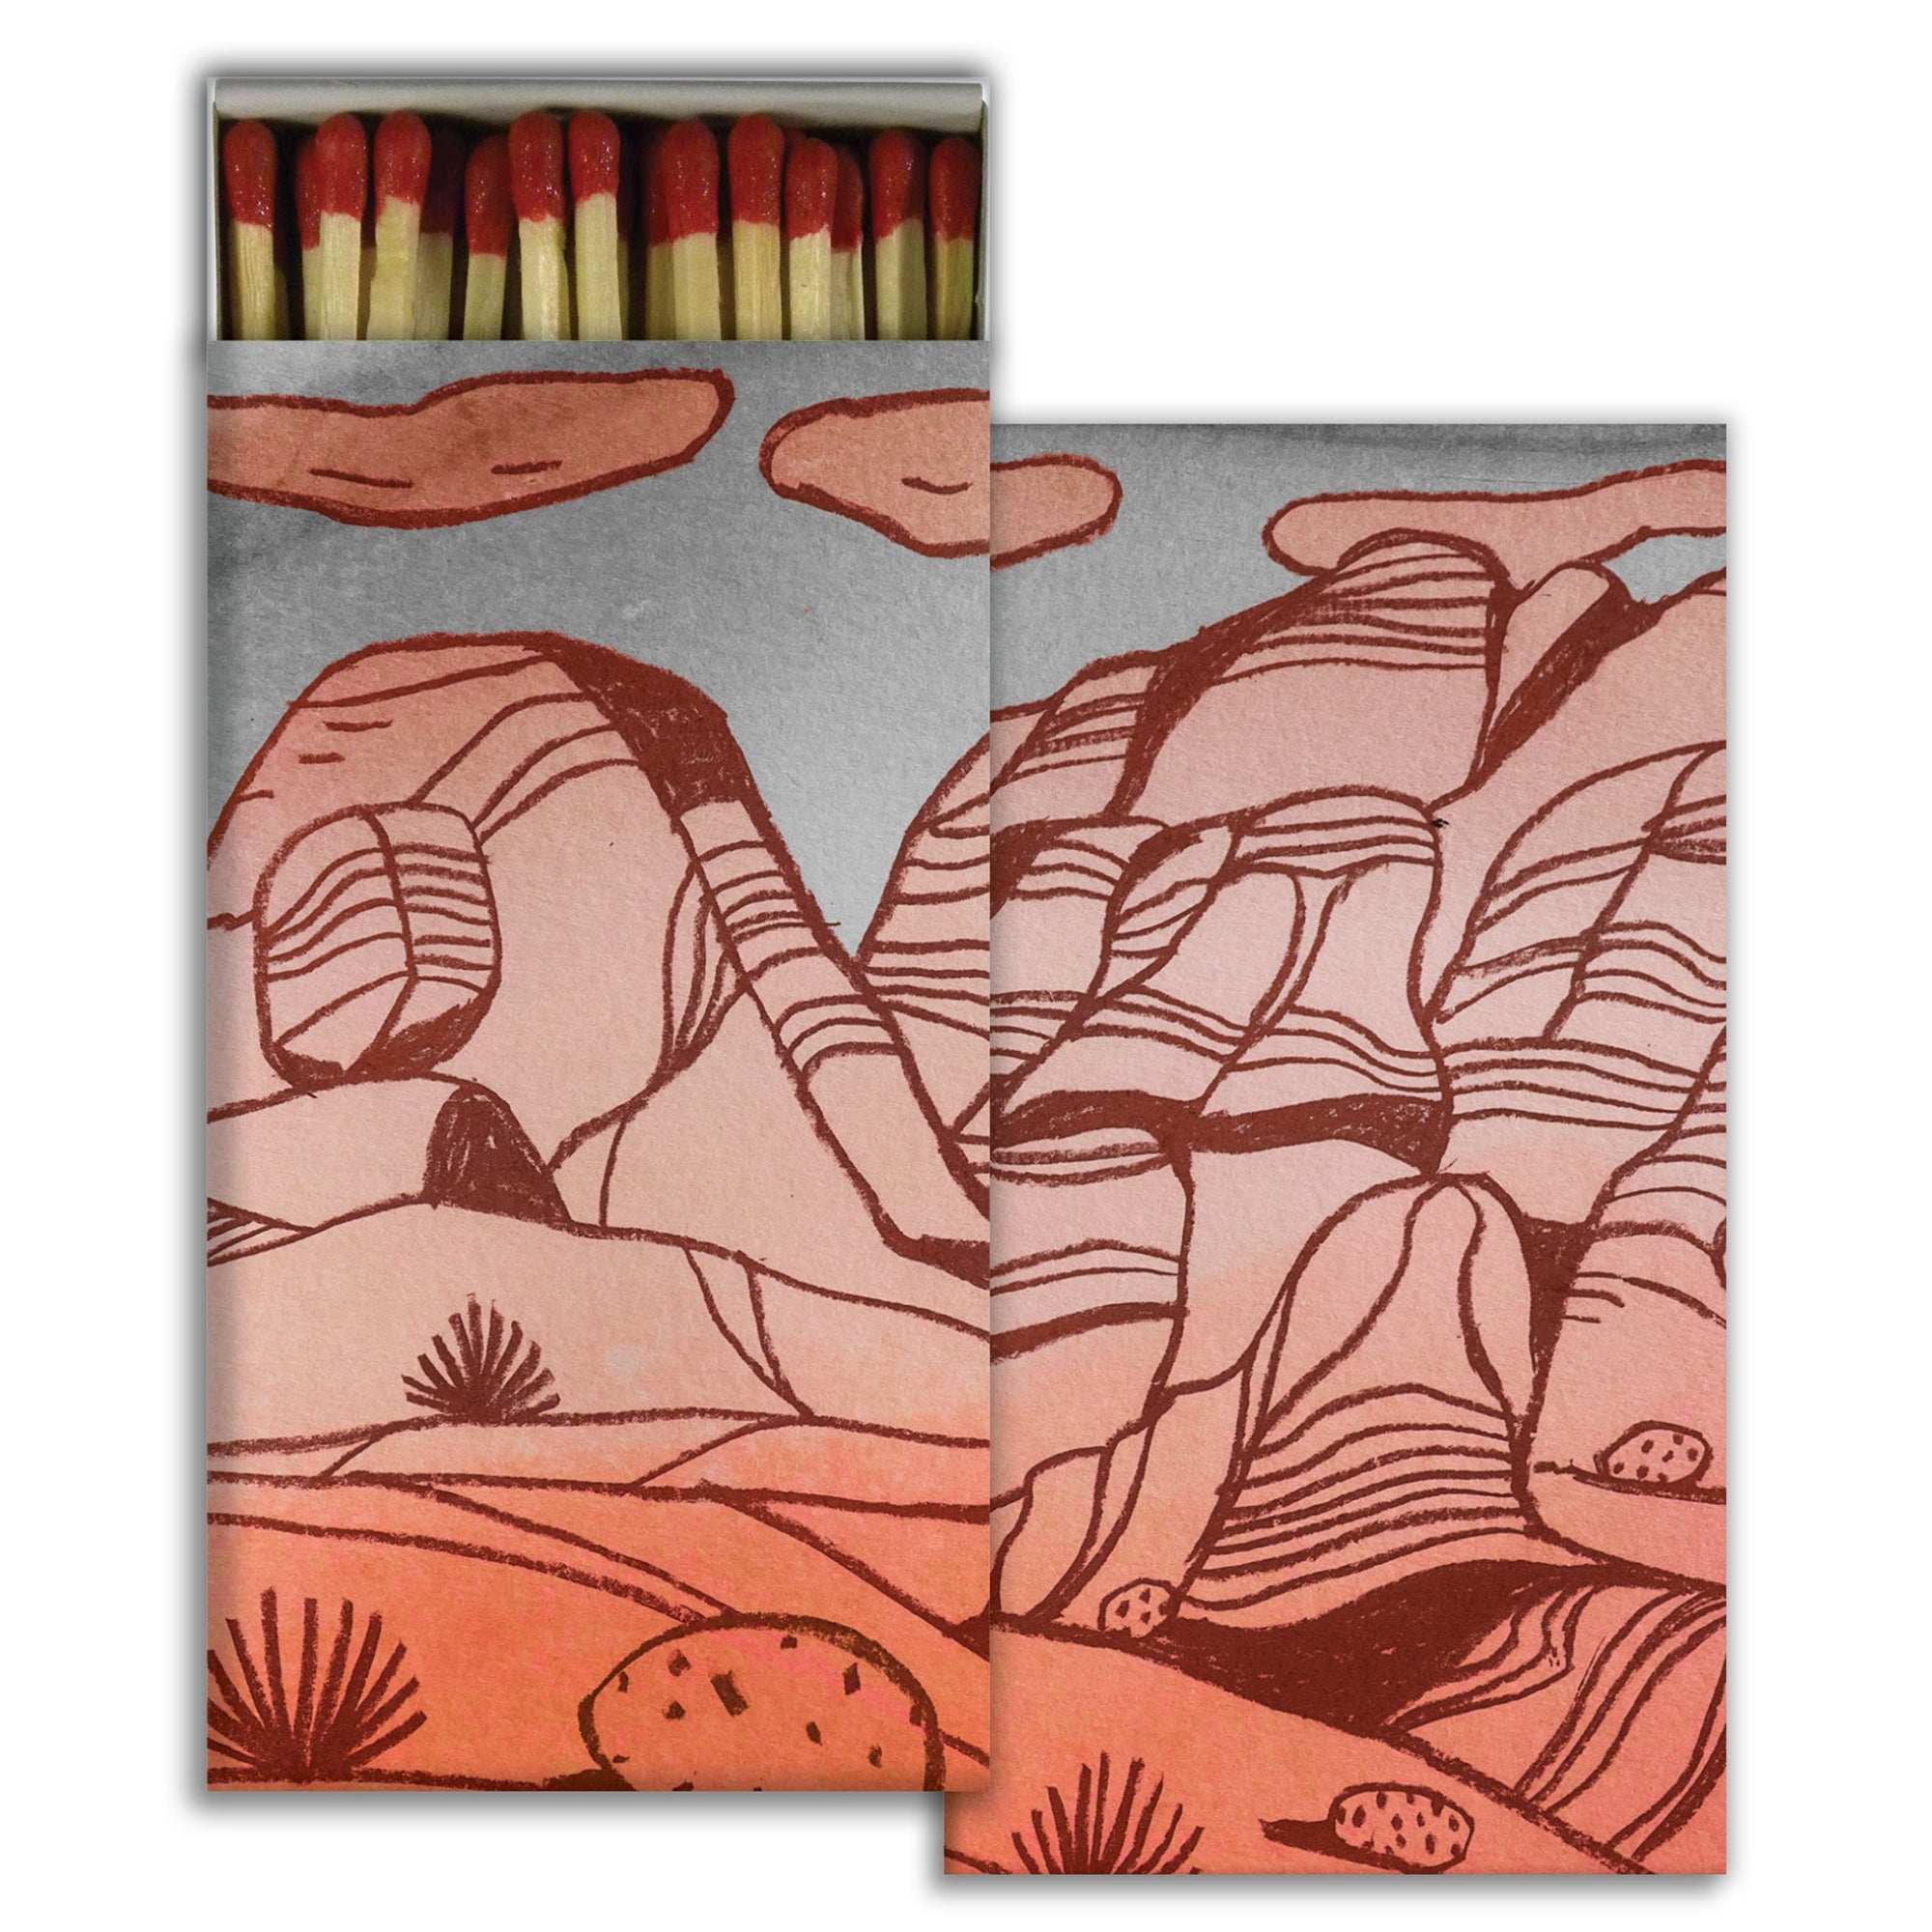 Matches - Red Rock Canyon